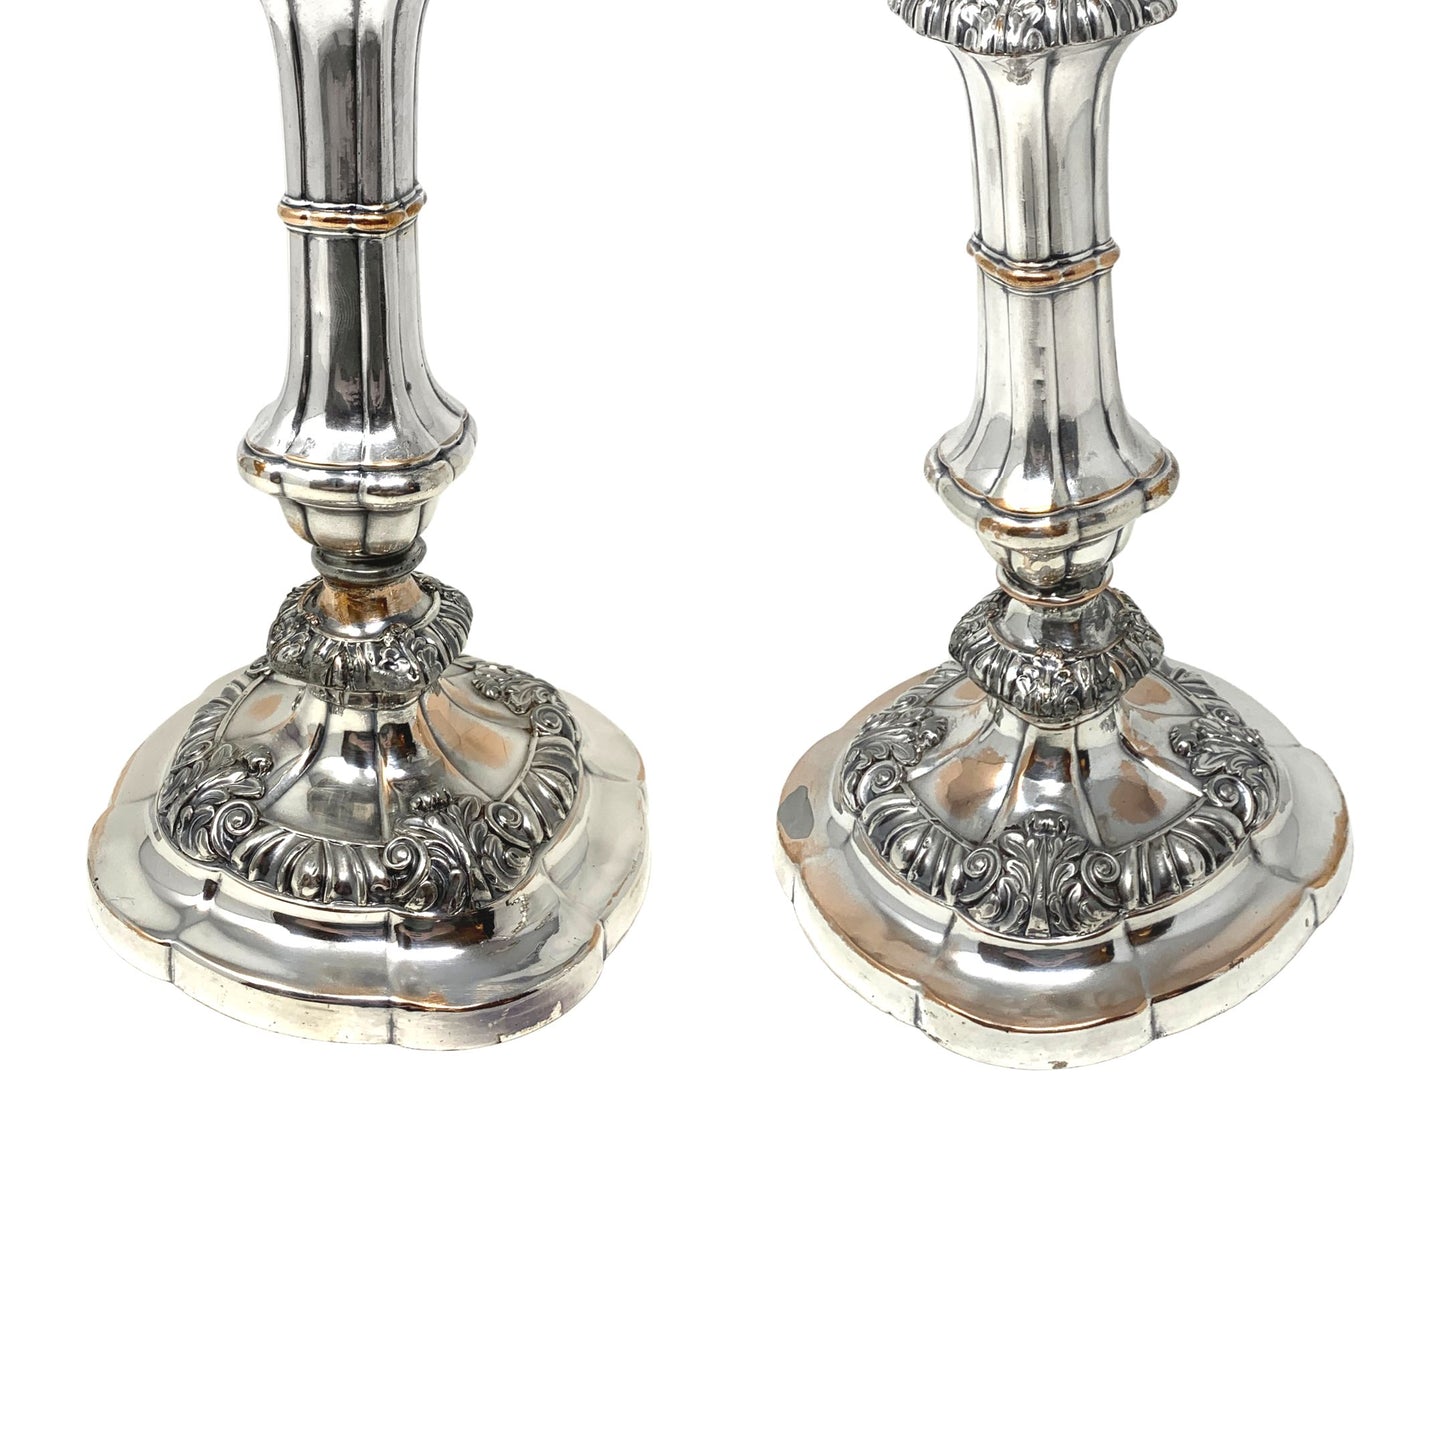 Pair of Antique Silverplate 5pc Triple Candelabras